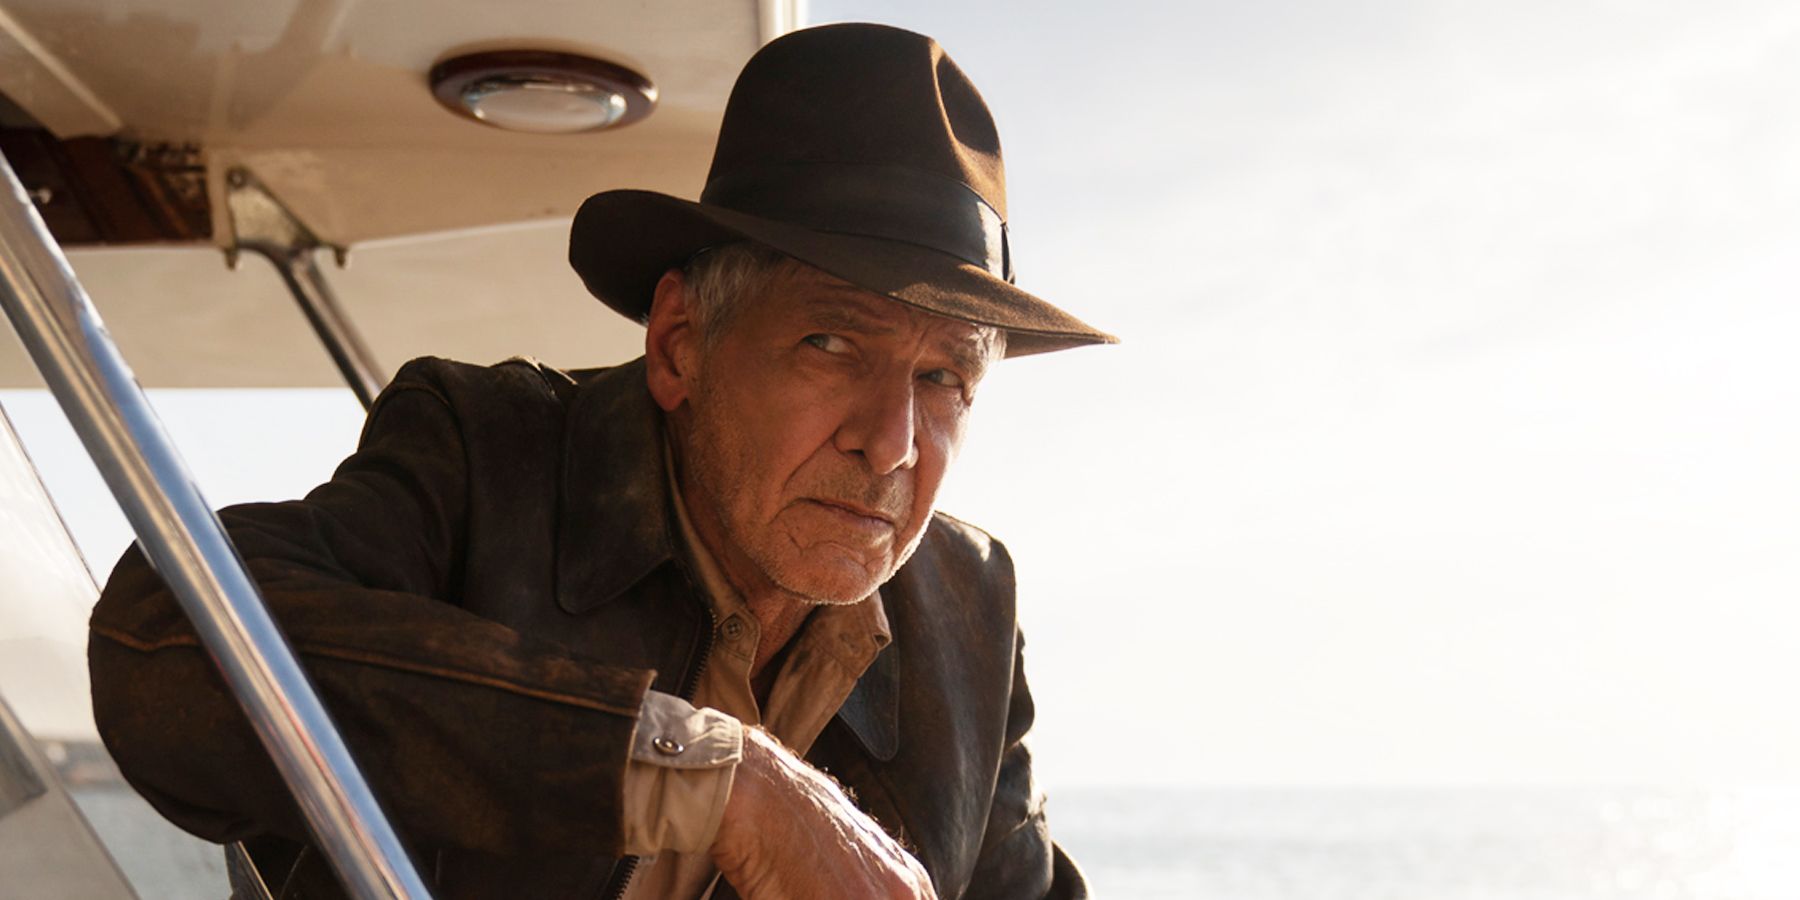 New Indiana Jones 5 Image Reveals Best Look At Harrison Ford's Return